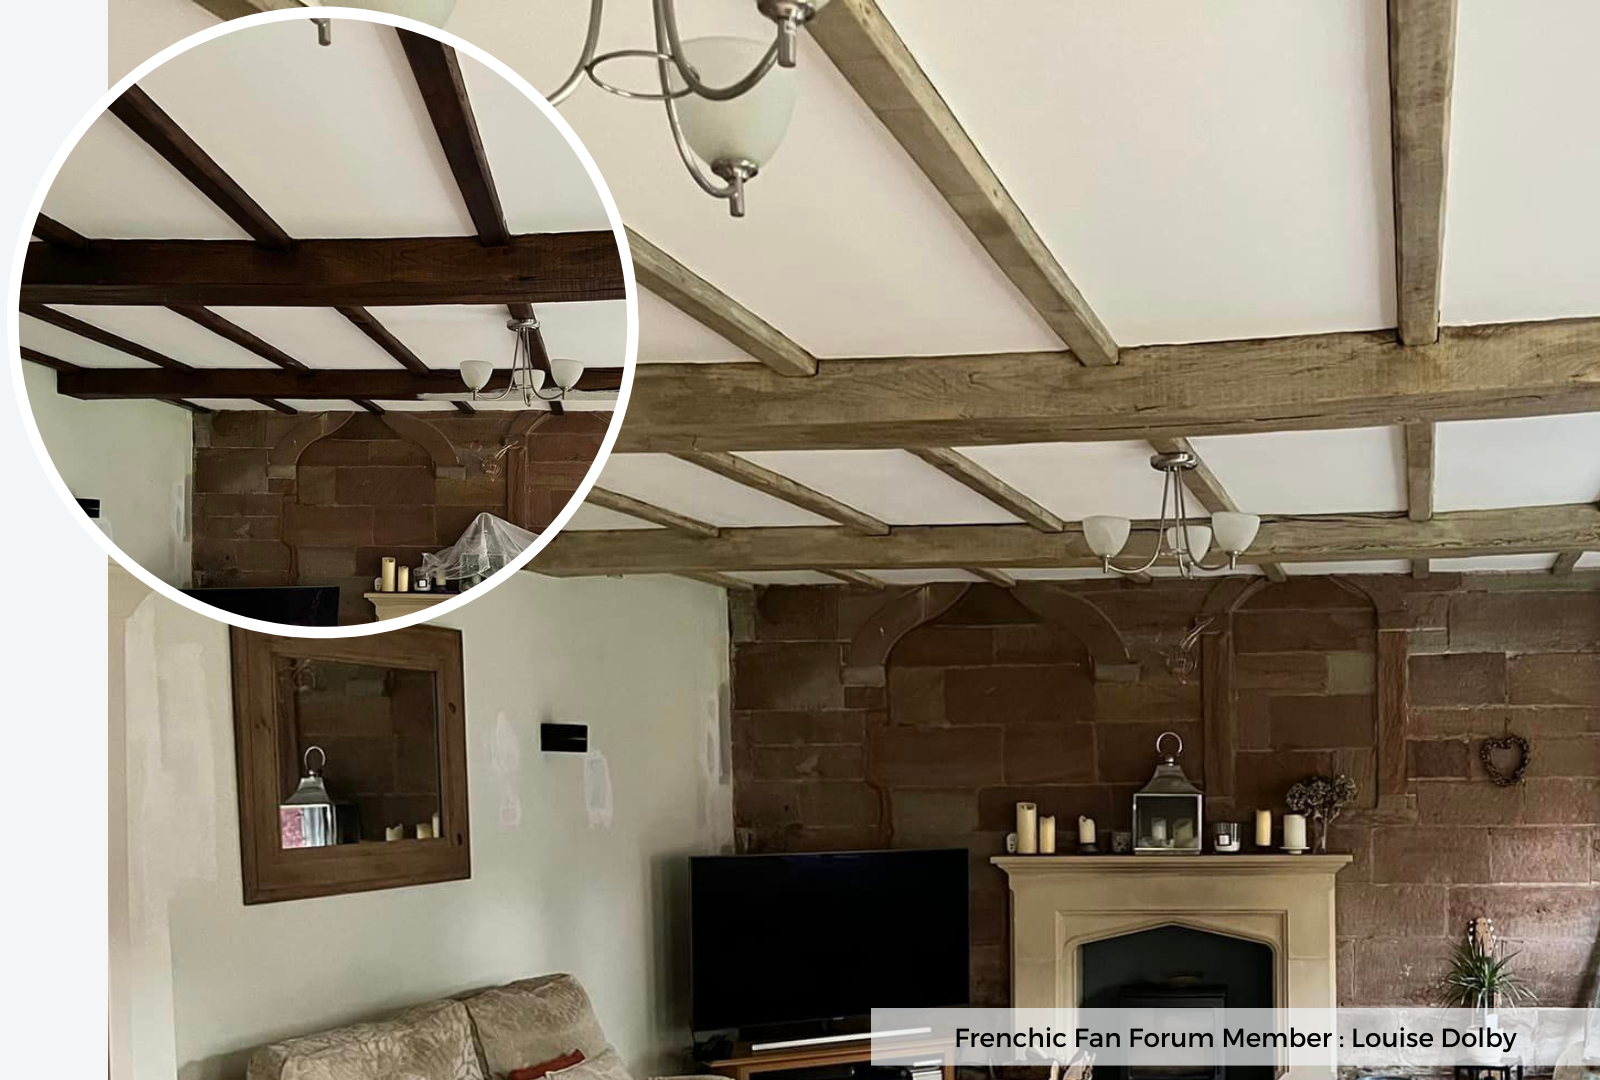 Frenchic Paint Blog | Unleashing the Frenchic Flair: Reviving Old Wooden Beams with Creme de la Creme and Browning Wax - The Hottest Trend of the Year! by Weirs of Baggot Street